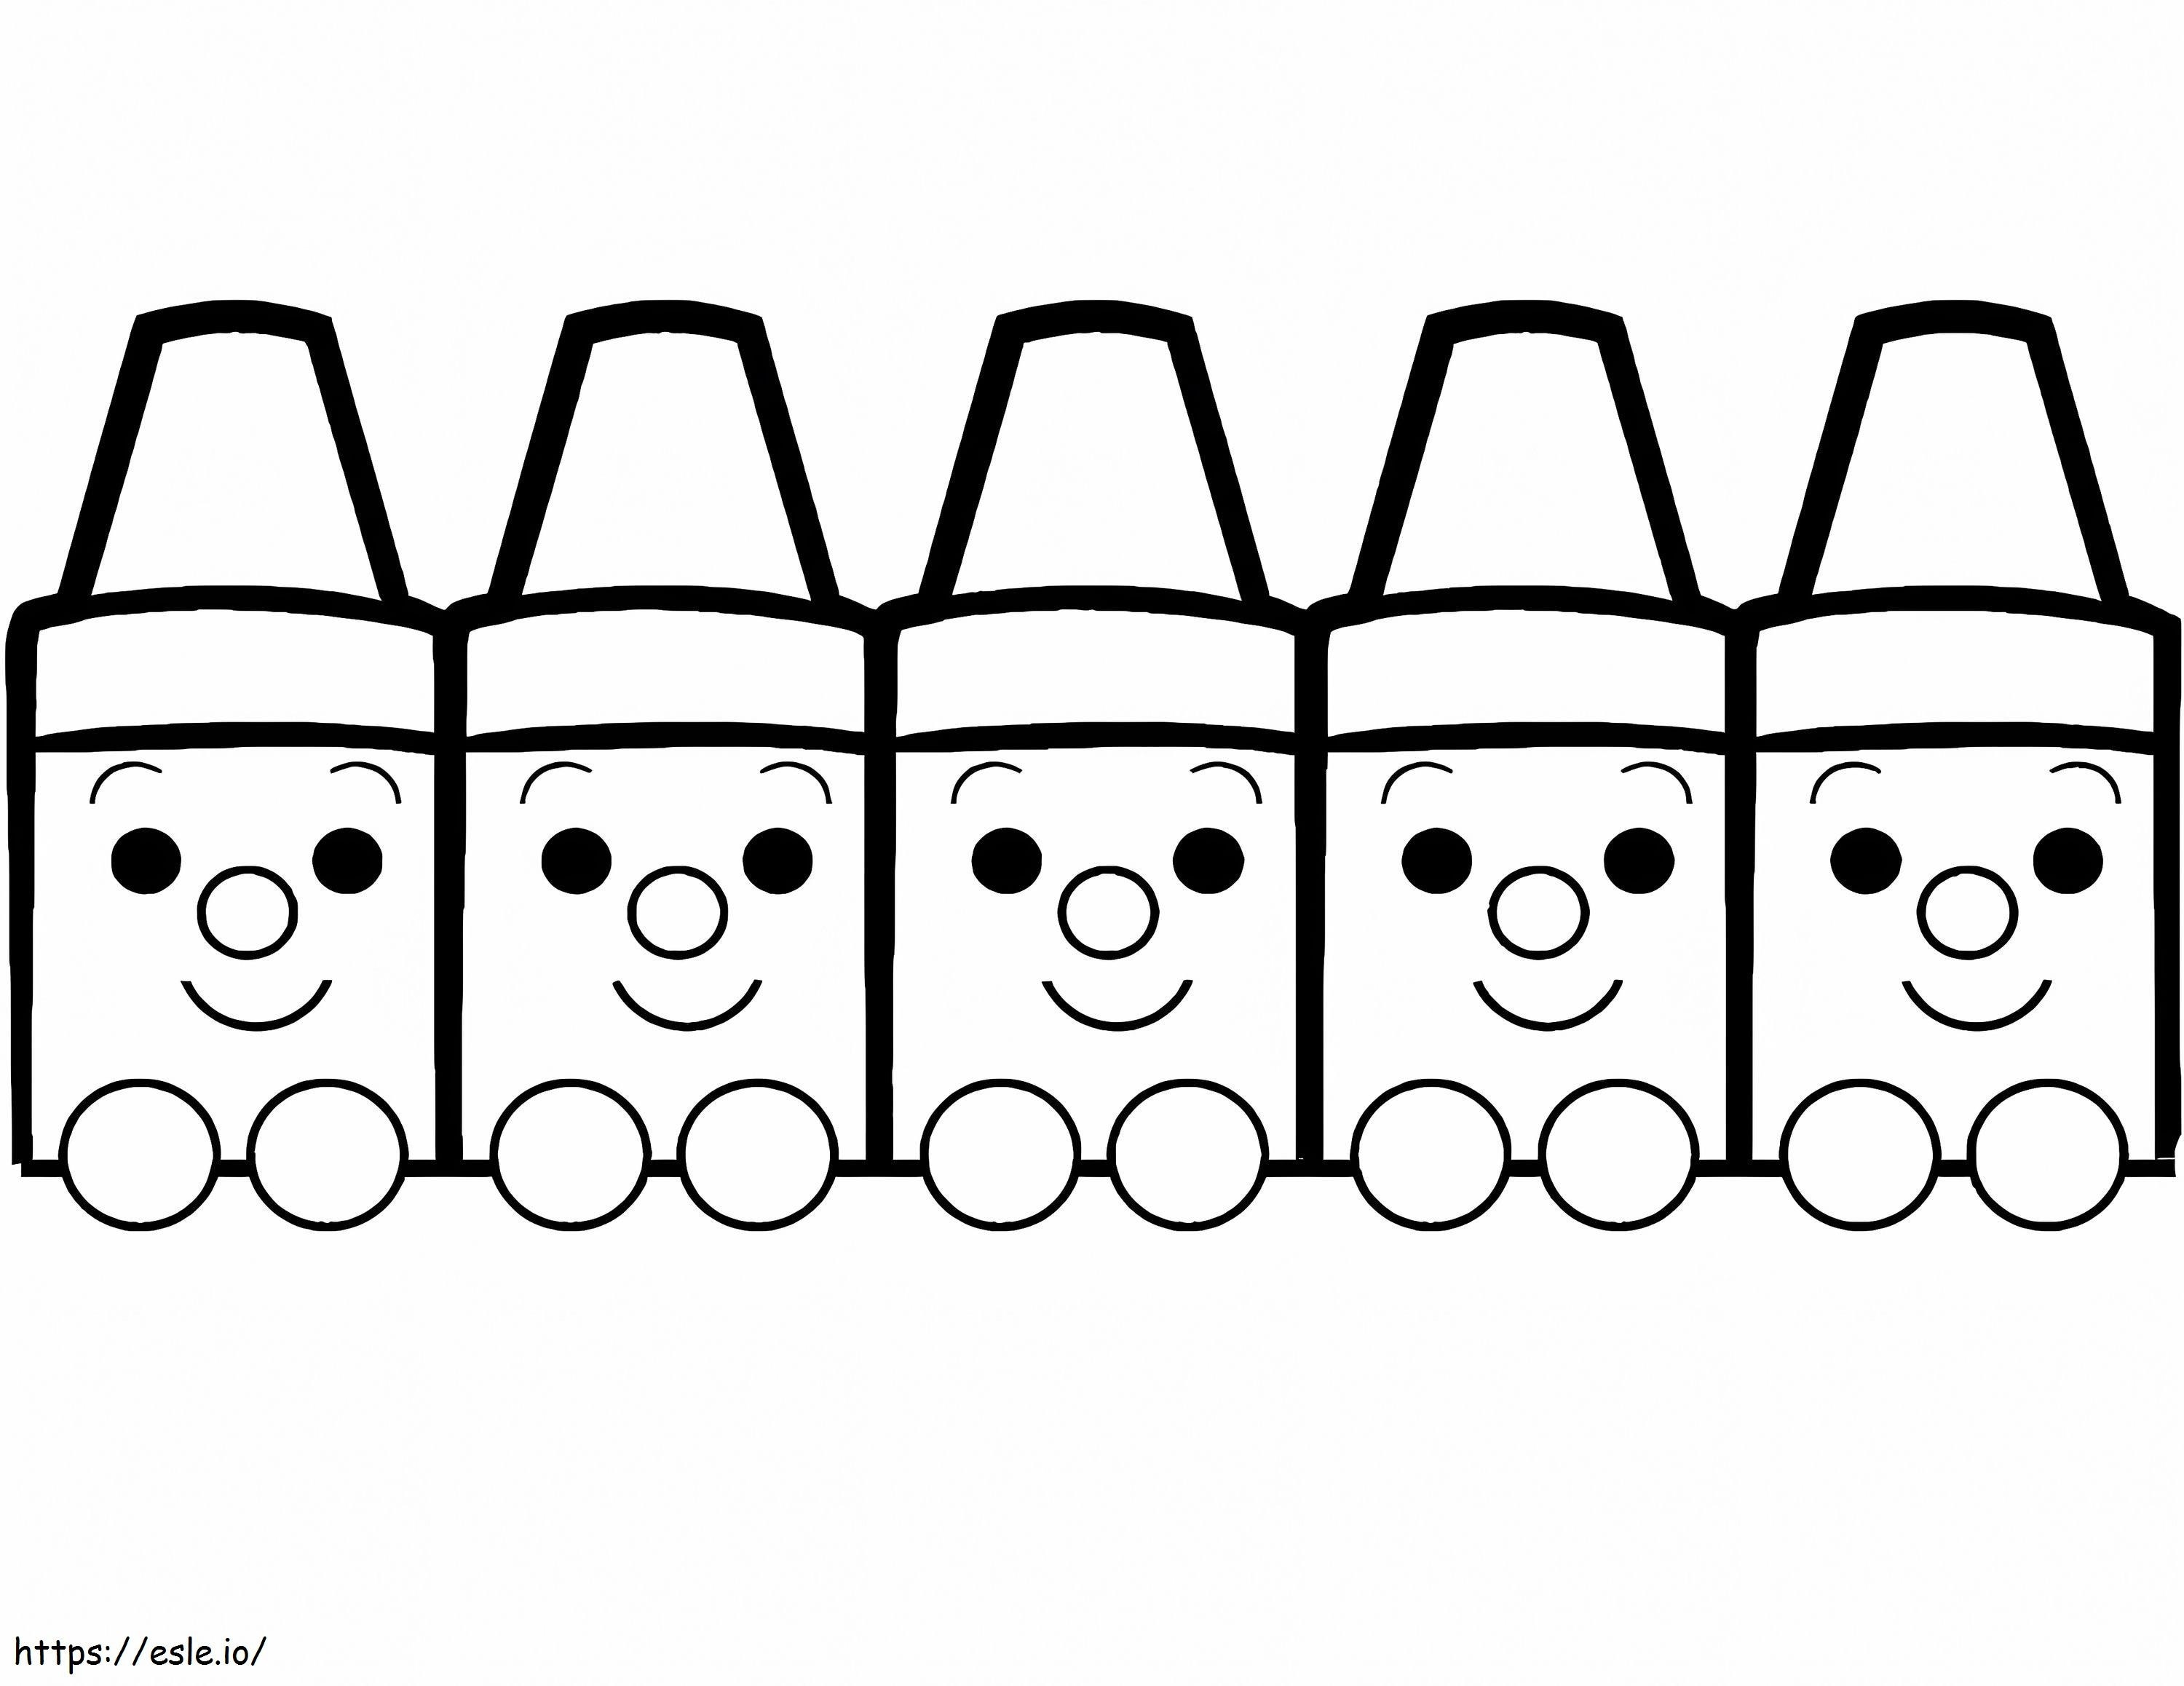 Little Crayons coloring page